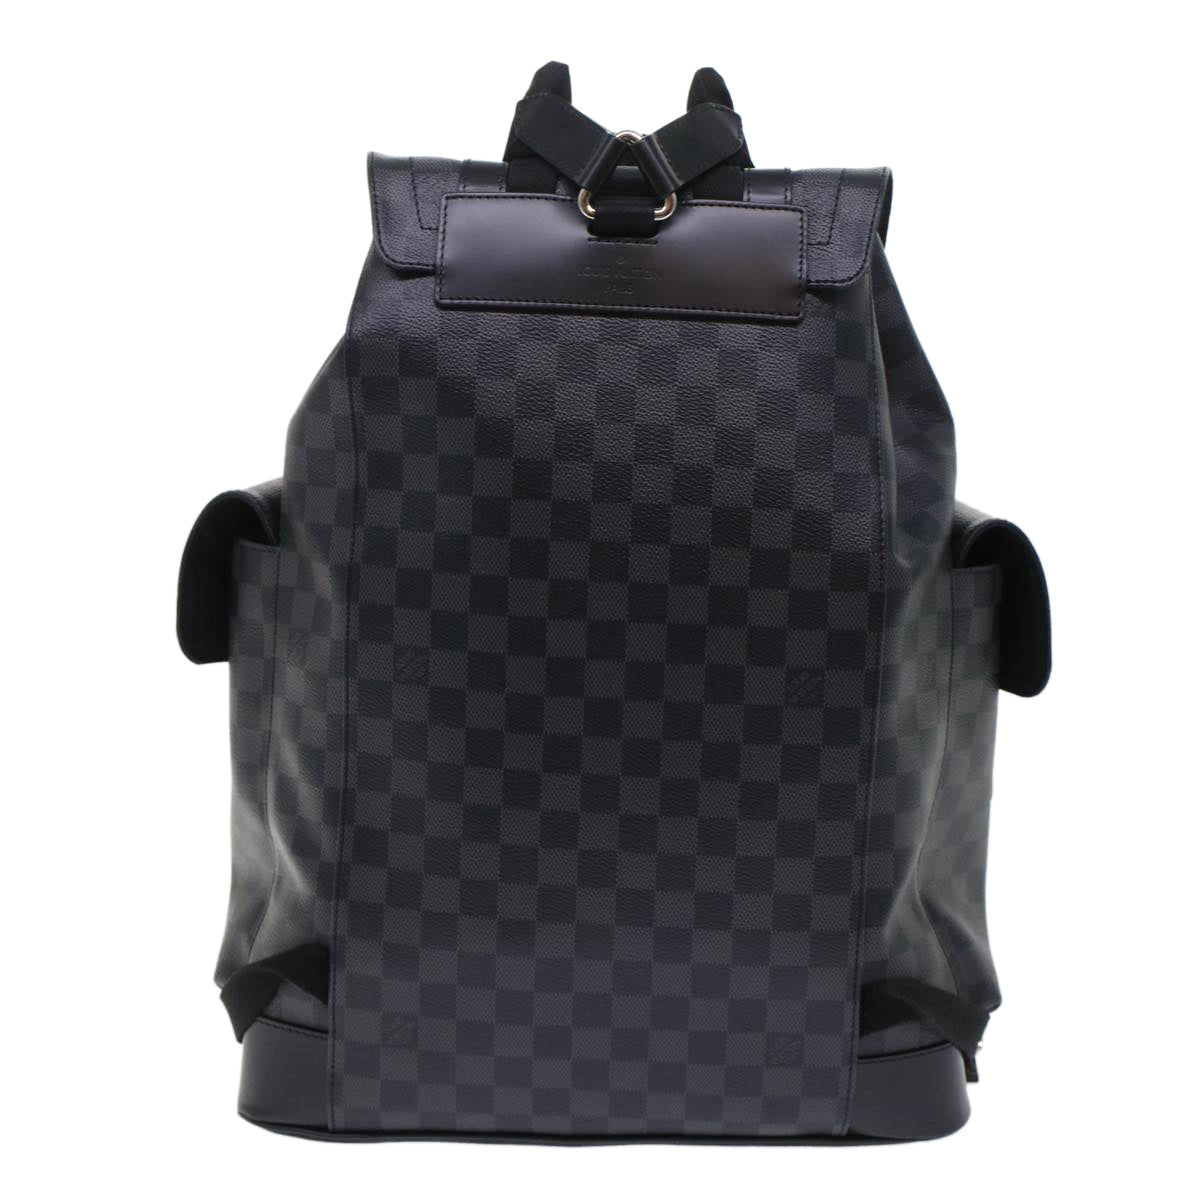 LOUIS VUITTON Damier Graphite Christopher PM Backpack N40005 LV Auth 49422A - 0